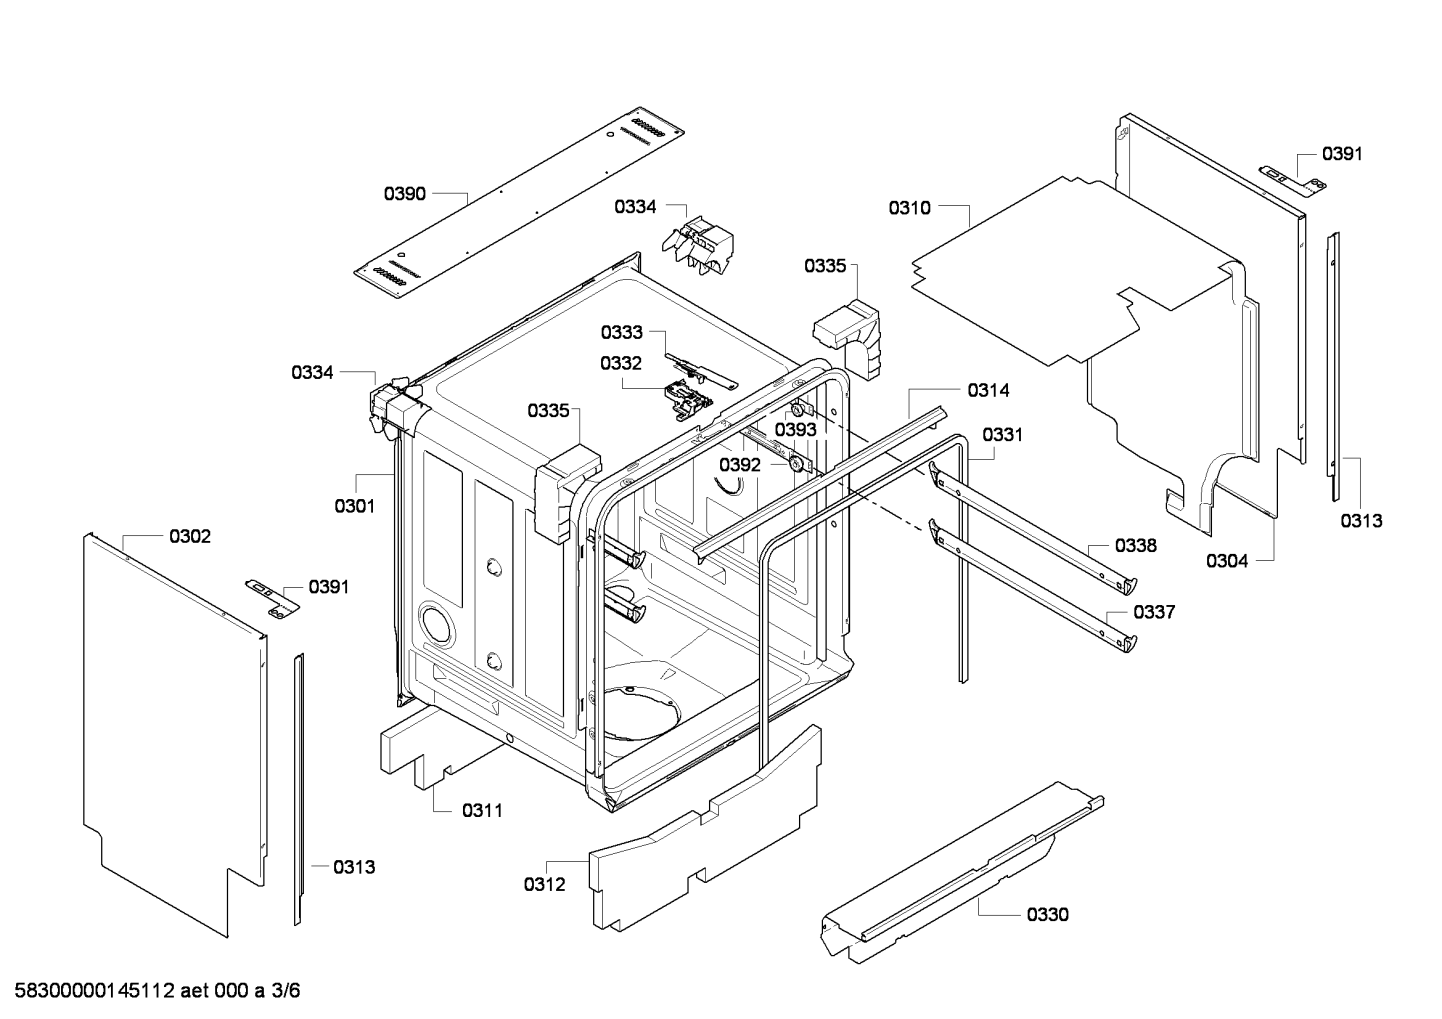 drawing_link_3_device_1635221